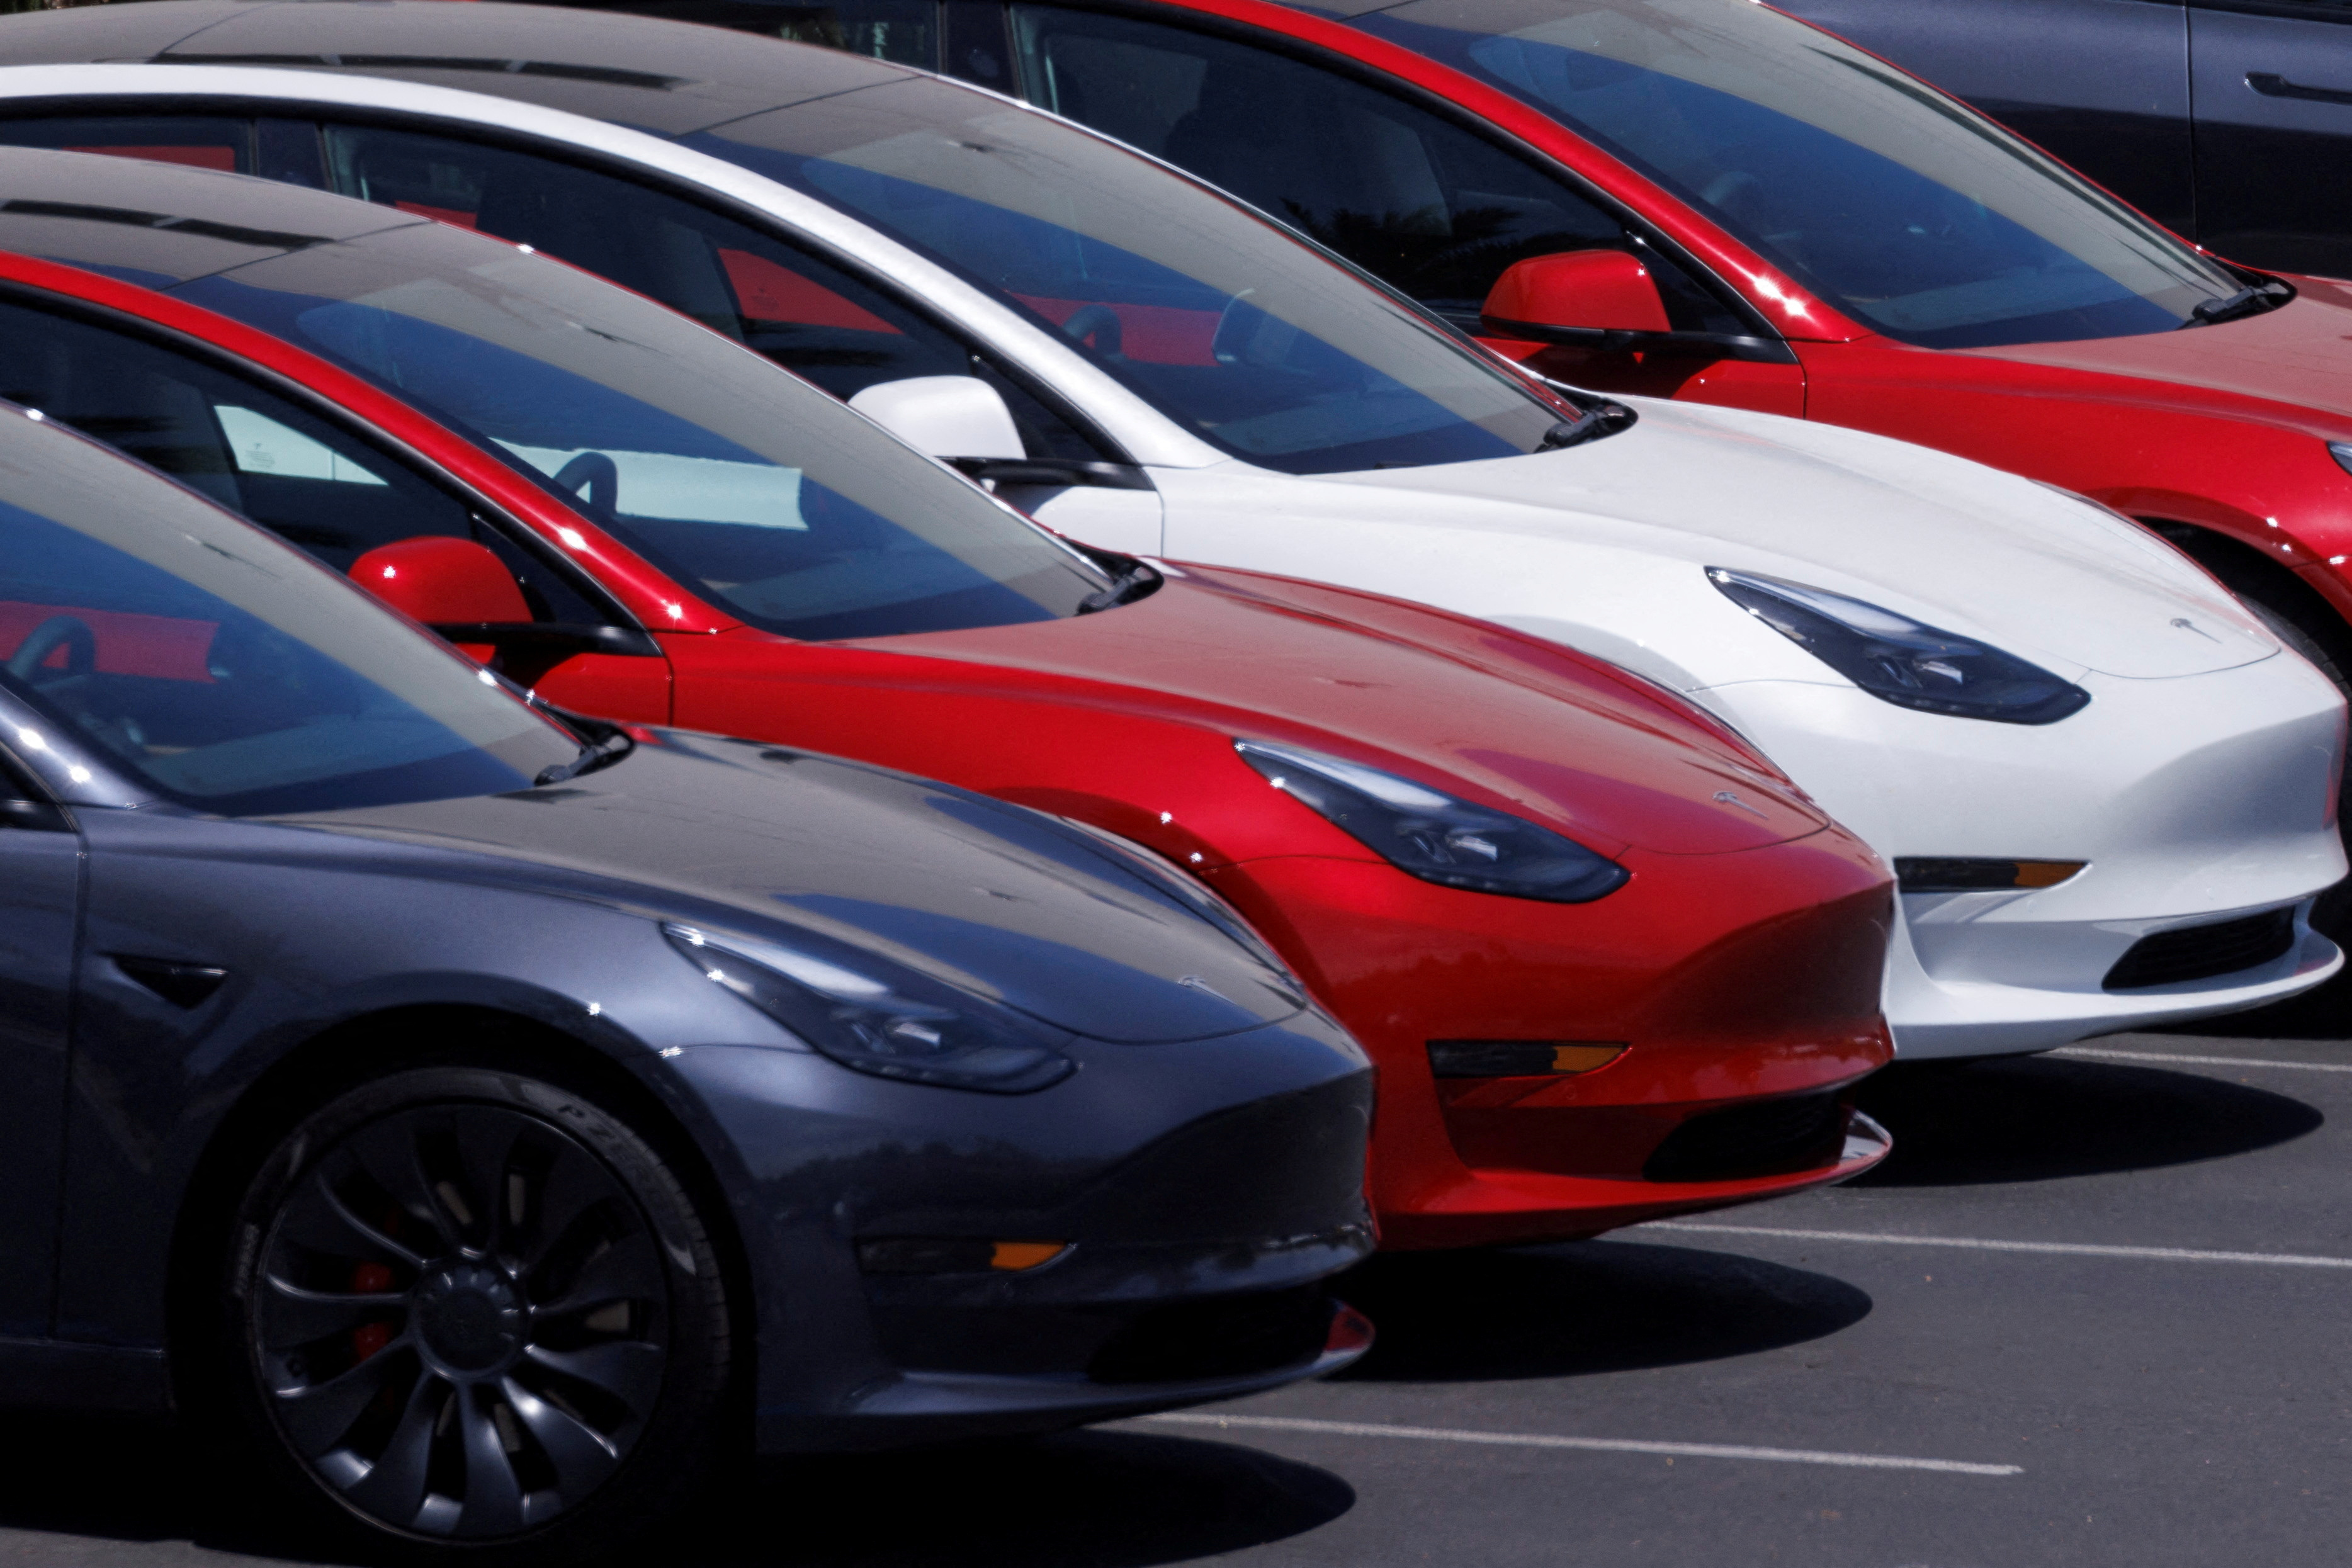 Tesla vehicles are shown at a sales and service center in Vista, California